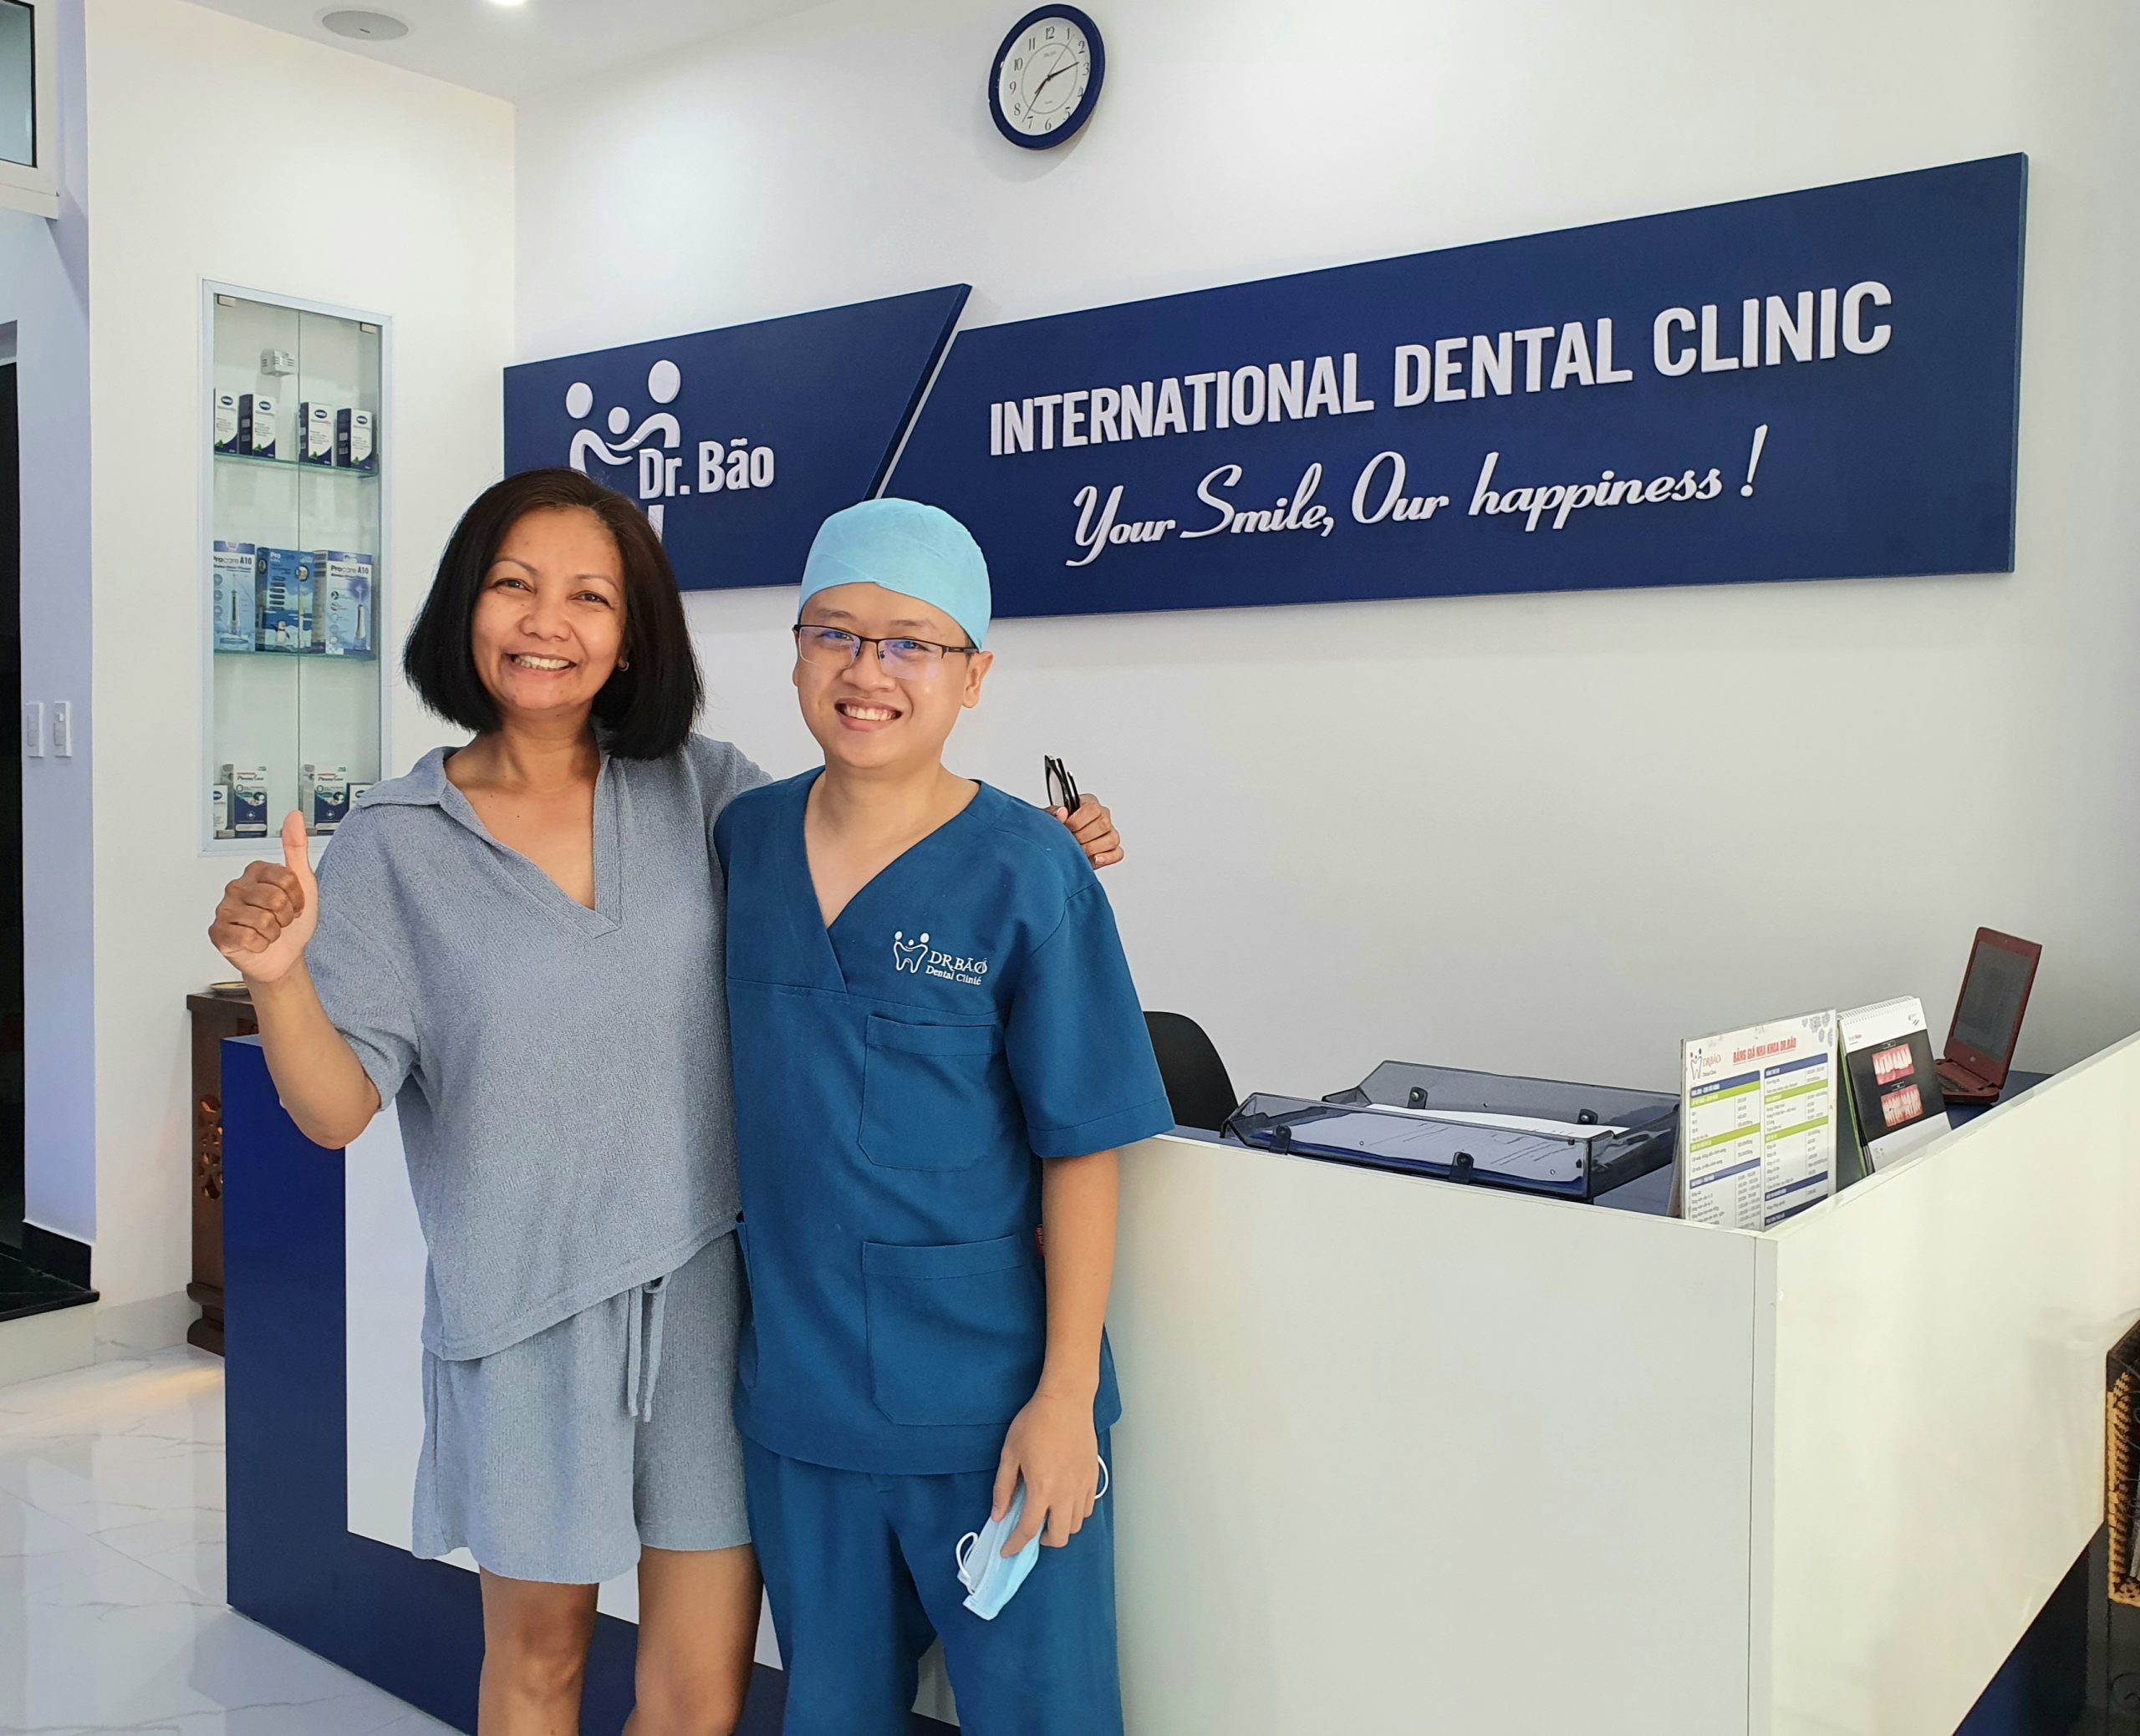 “I can’t recommend and thank him enough for giving me back my confident smile” – Mrs.Analee said